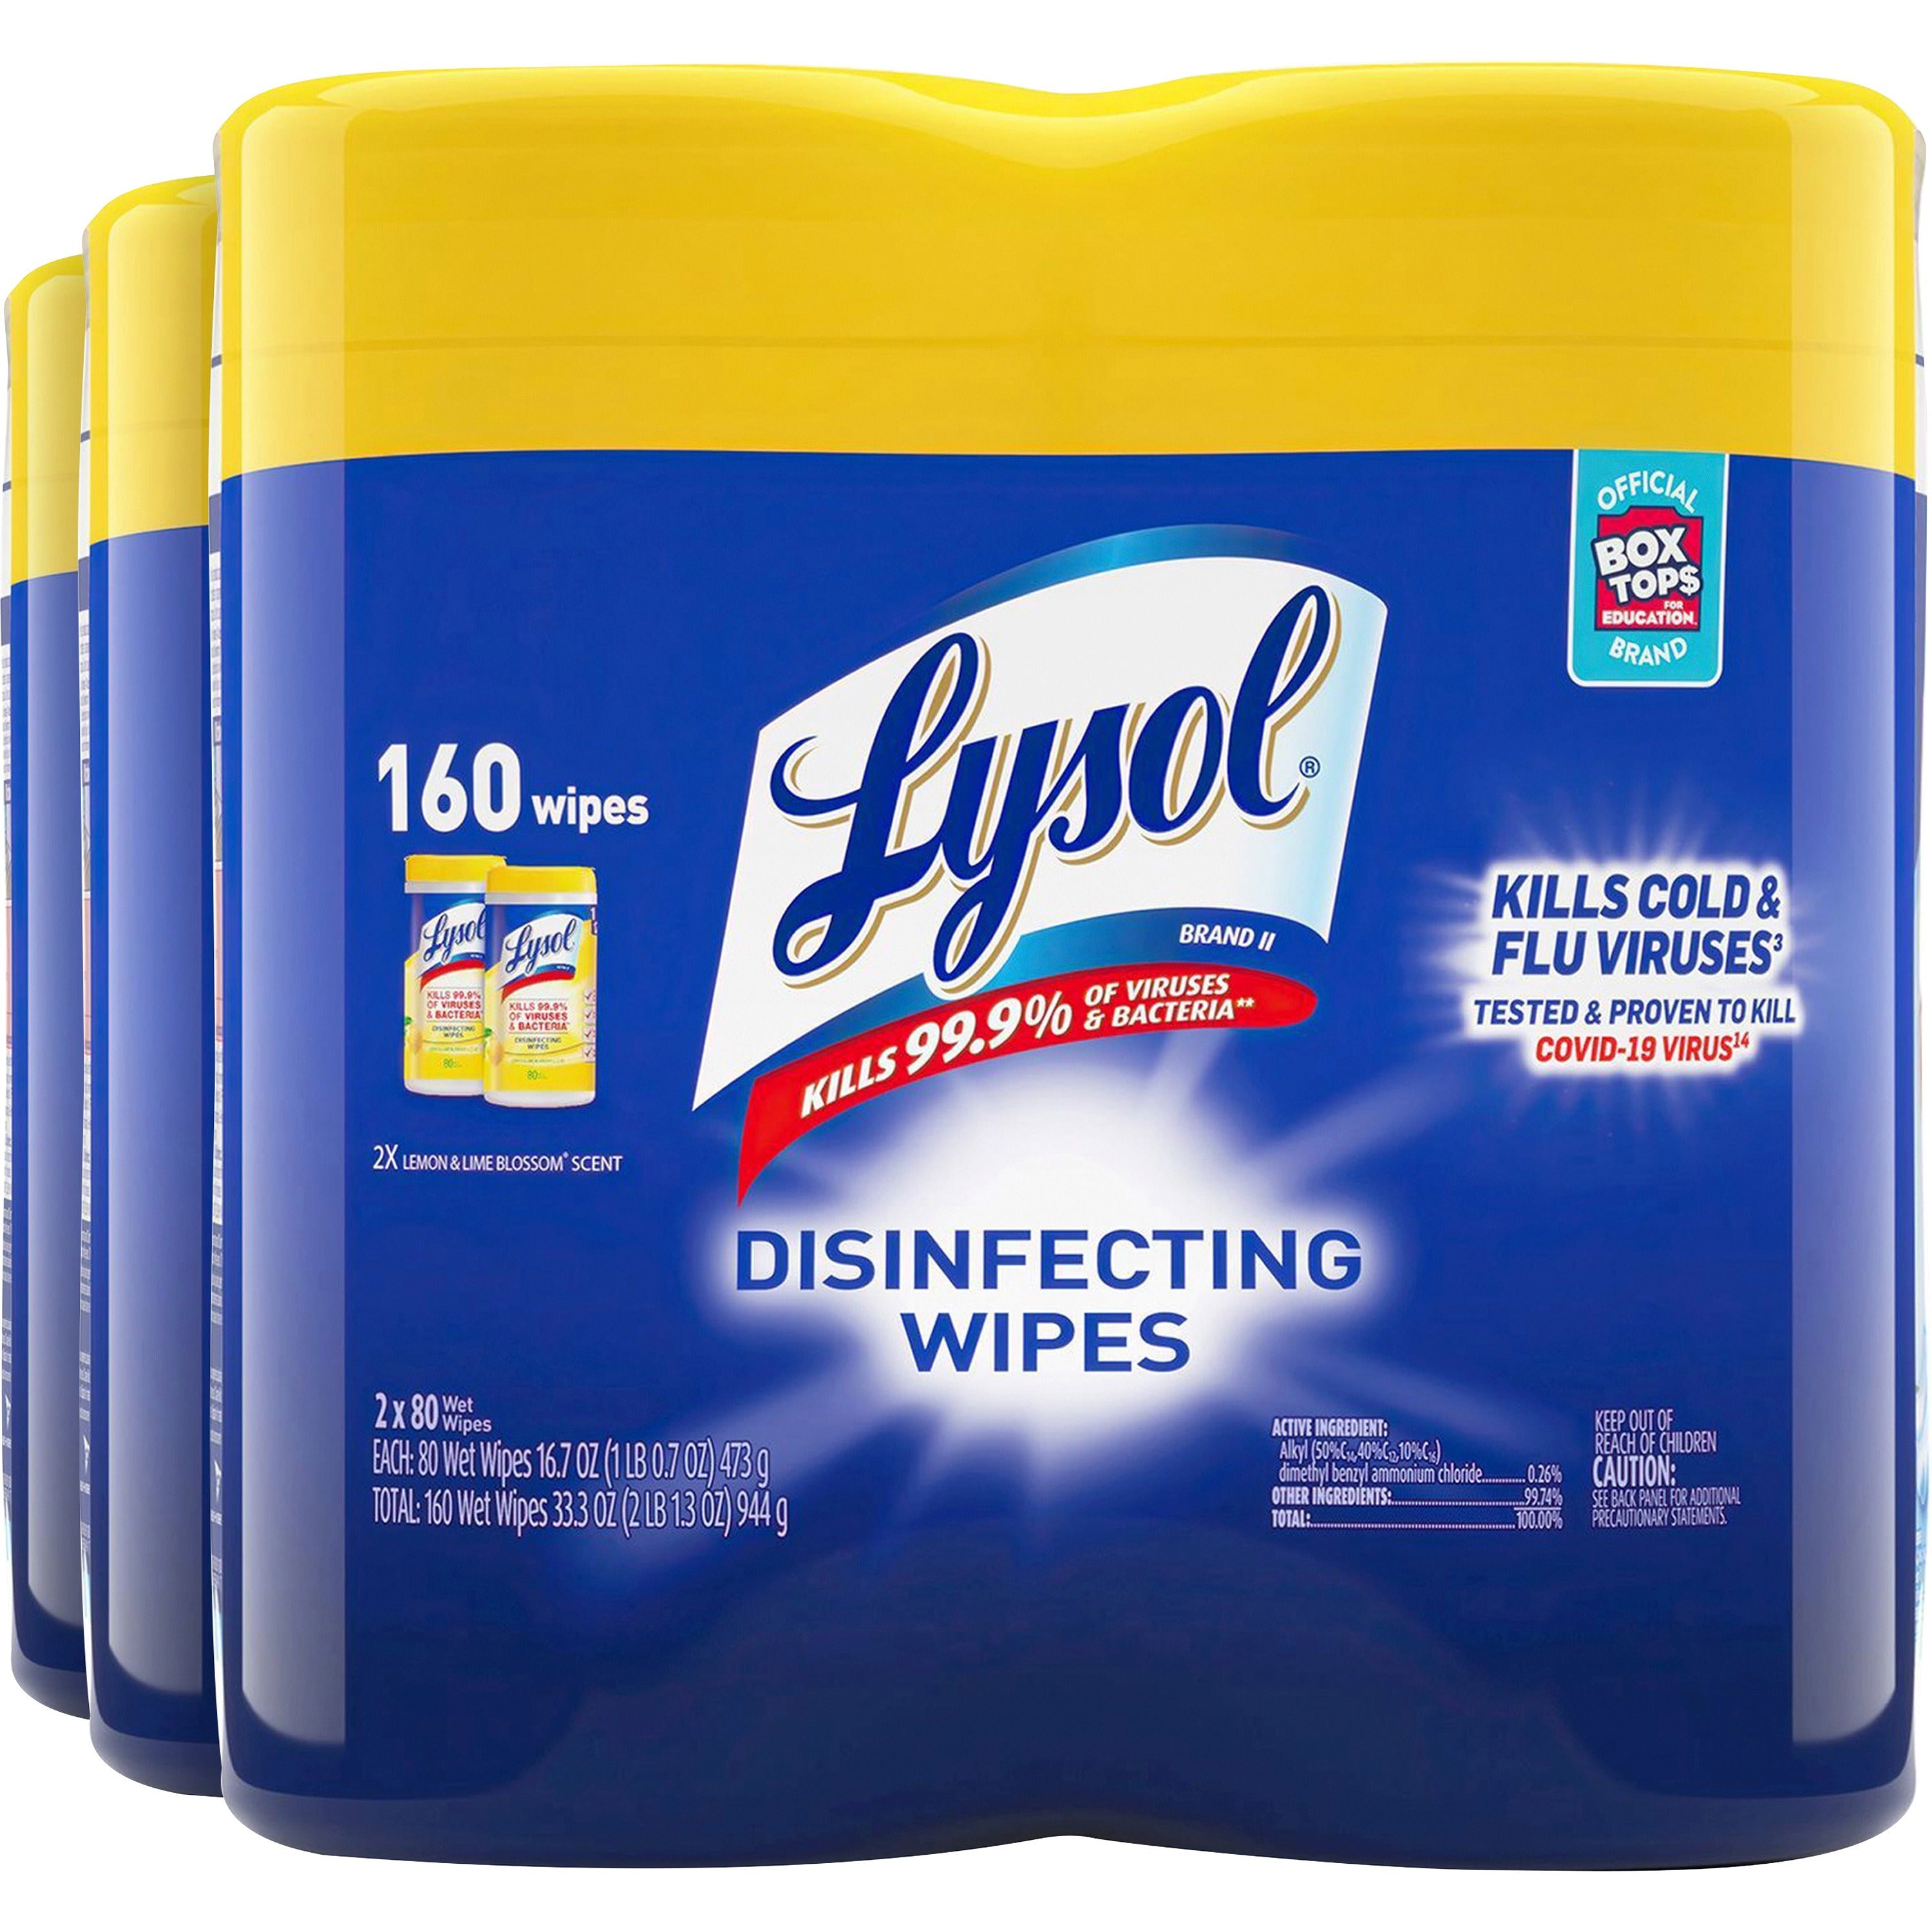 lysol-disinfecting-wipes-lemon-lime-scent-80-canister-6-carton-pre-moistened-disinfectant-antibacterial-white_rac80296ct - 1